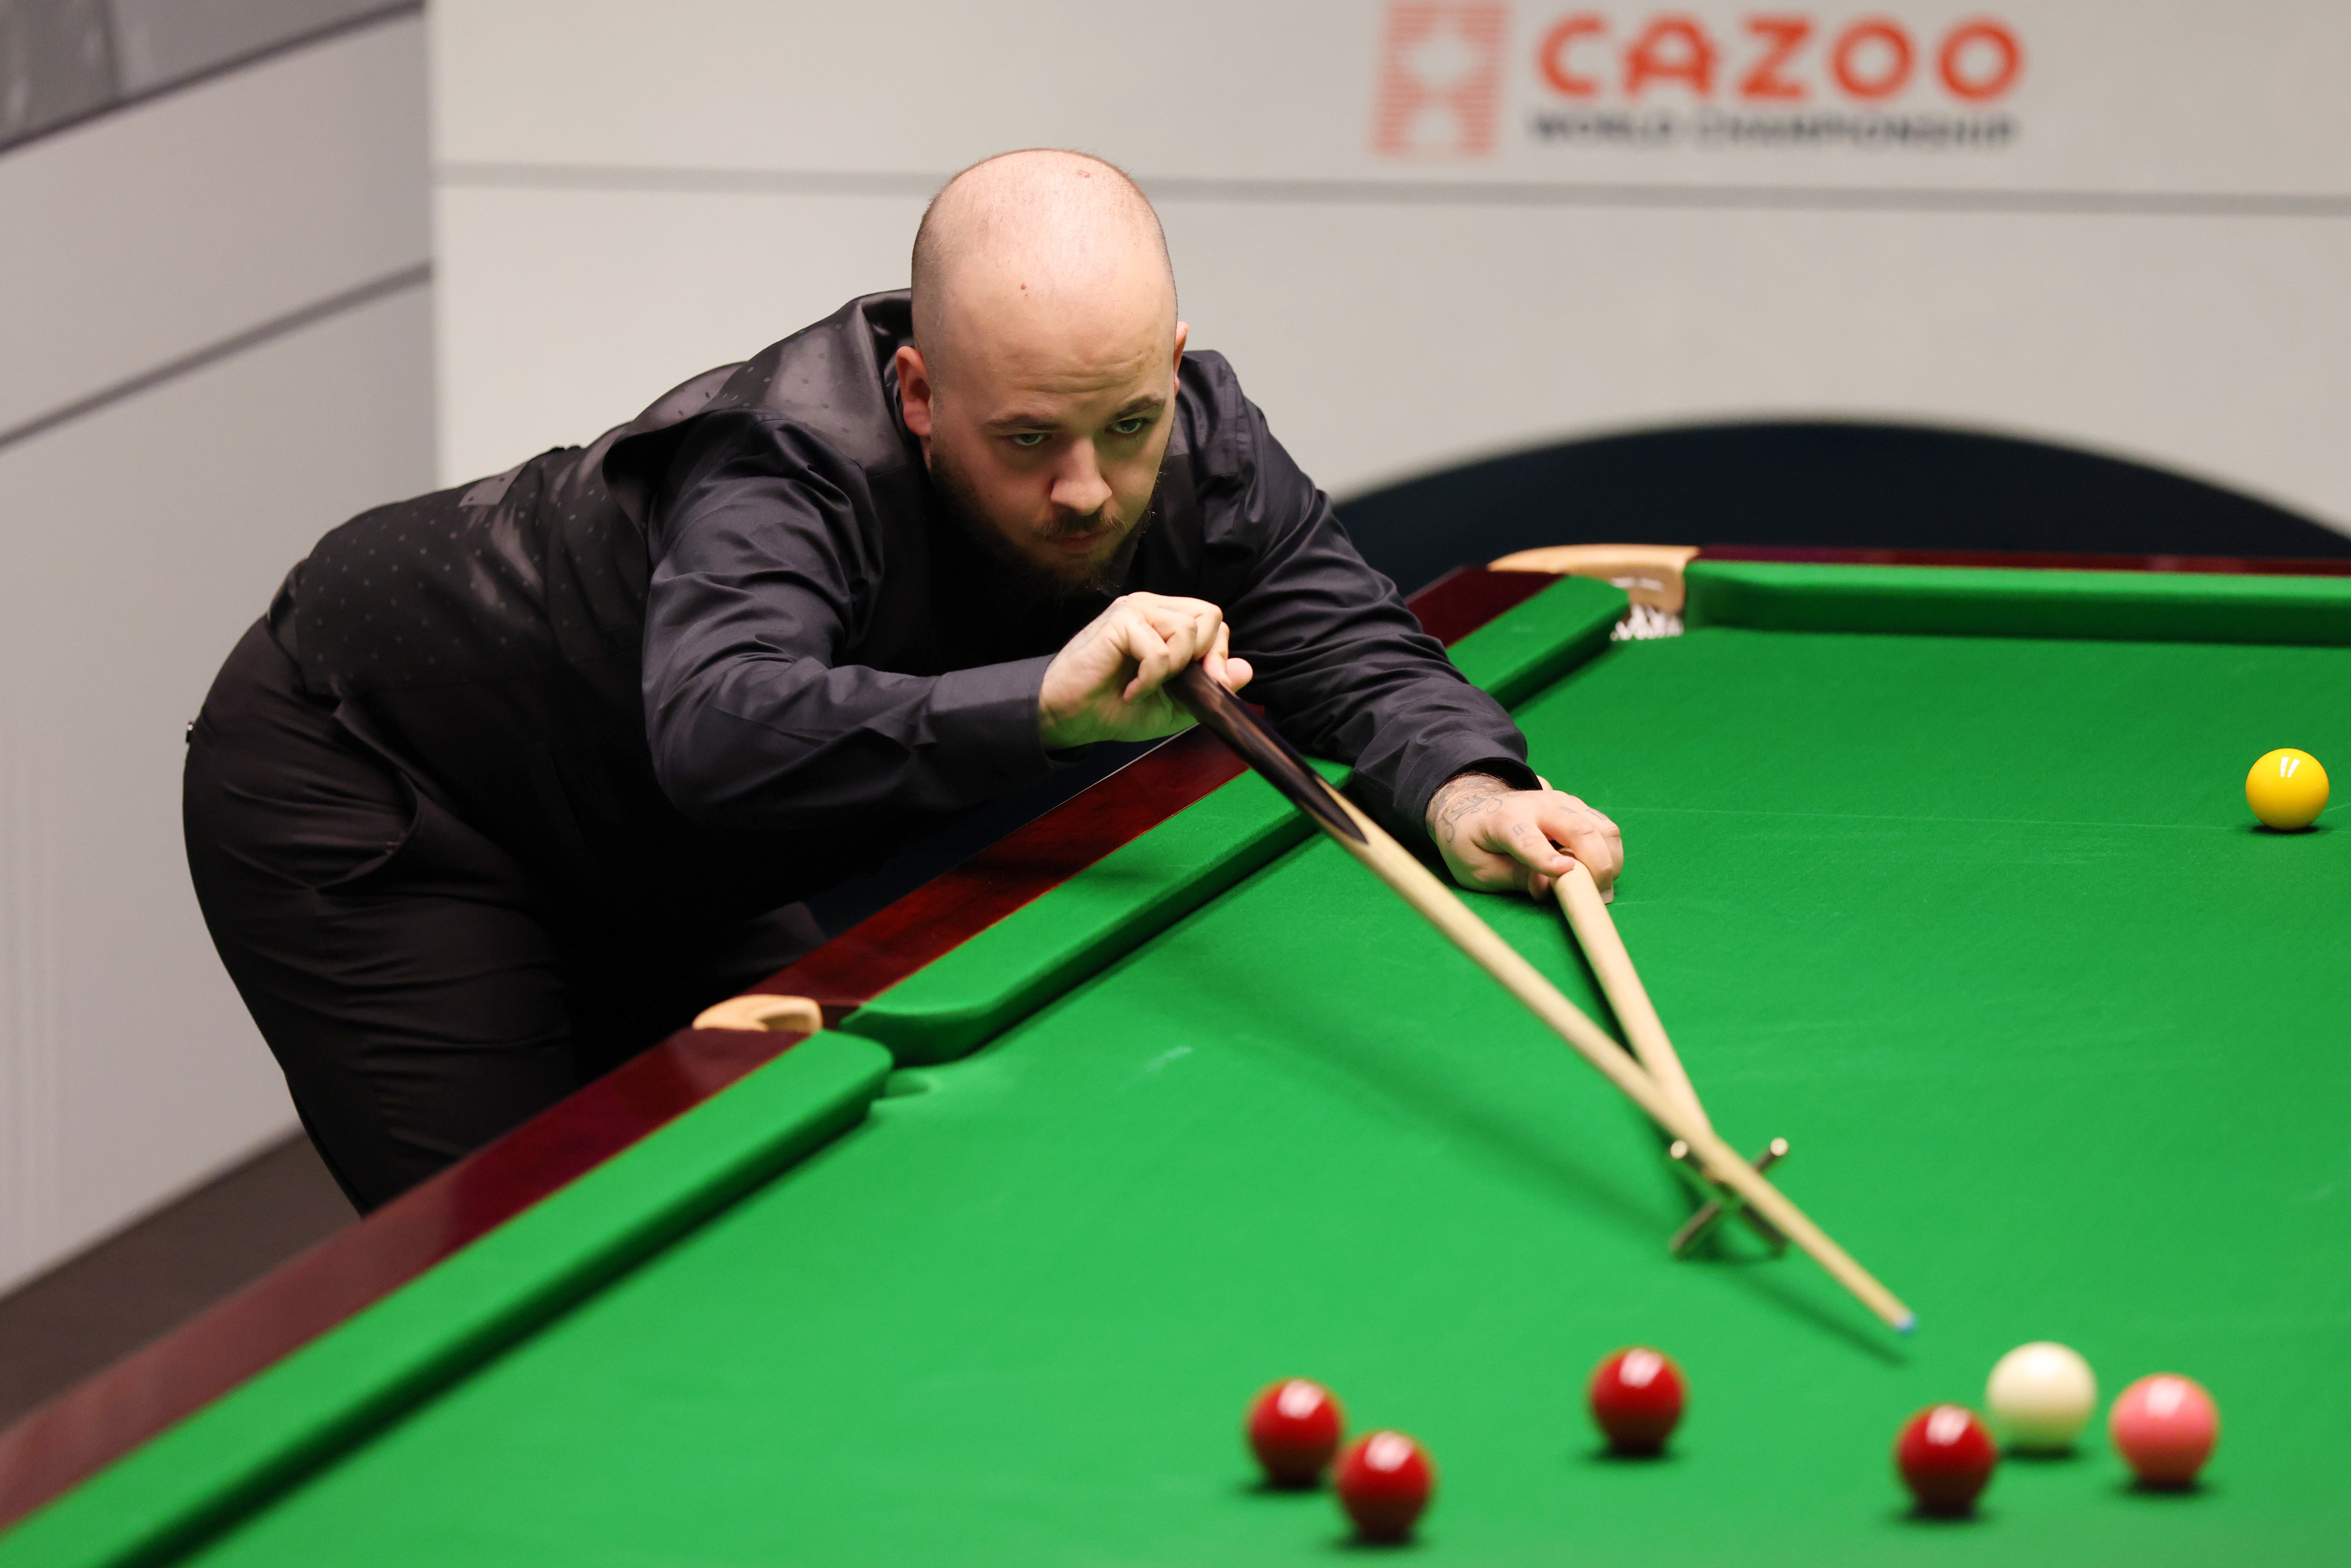 Luca Brecel at the table against Ronnie O’Sullivan